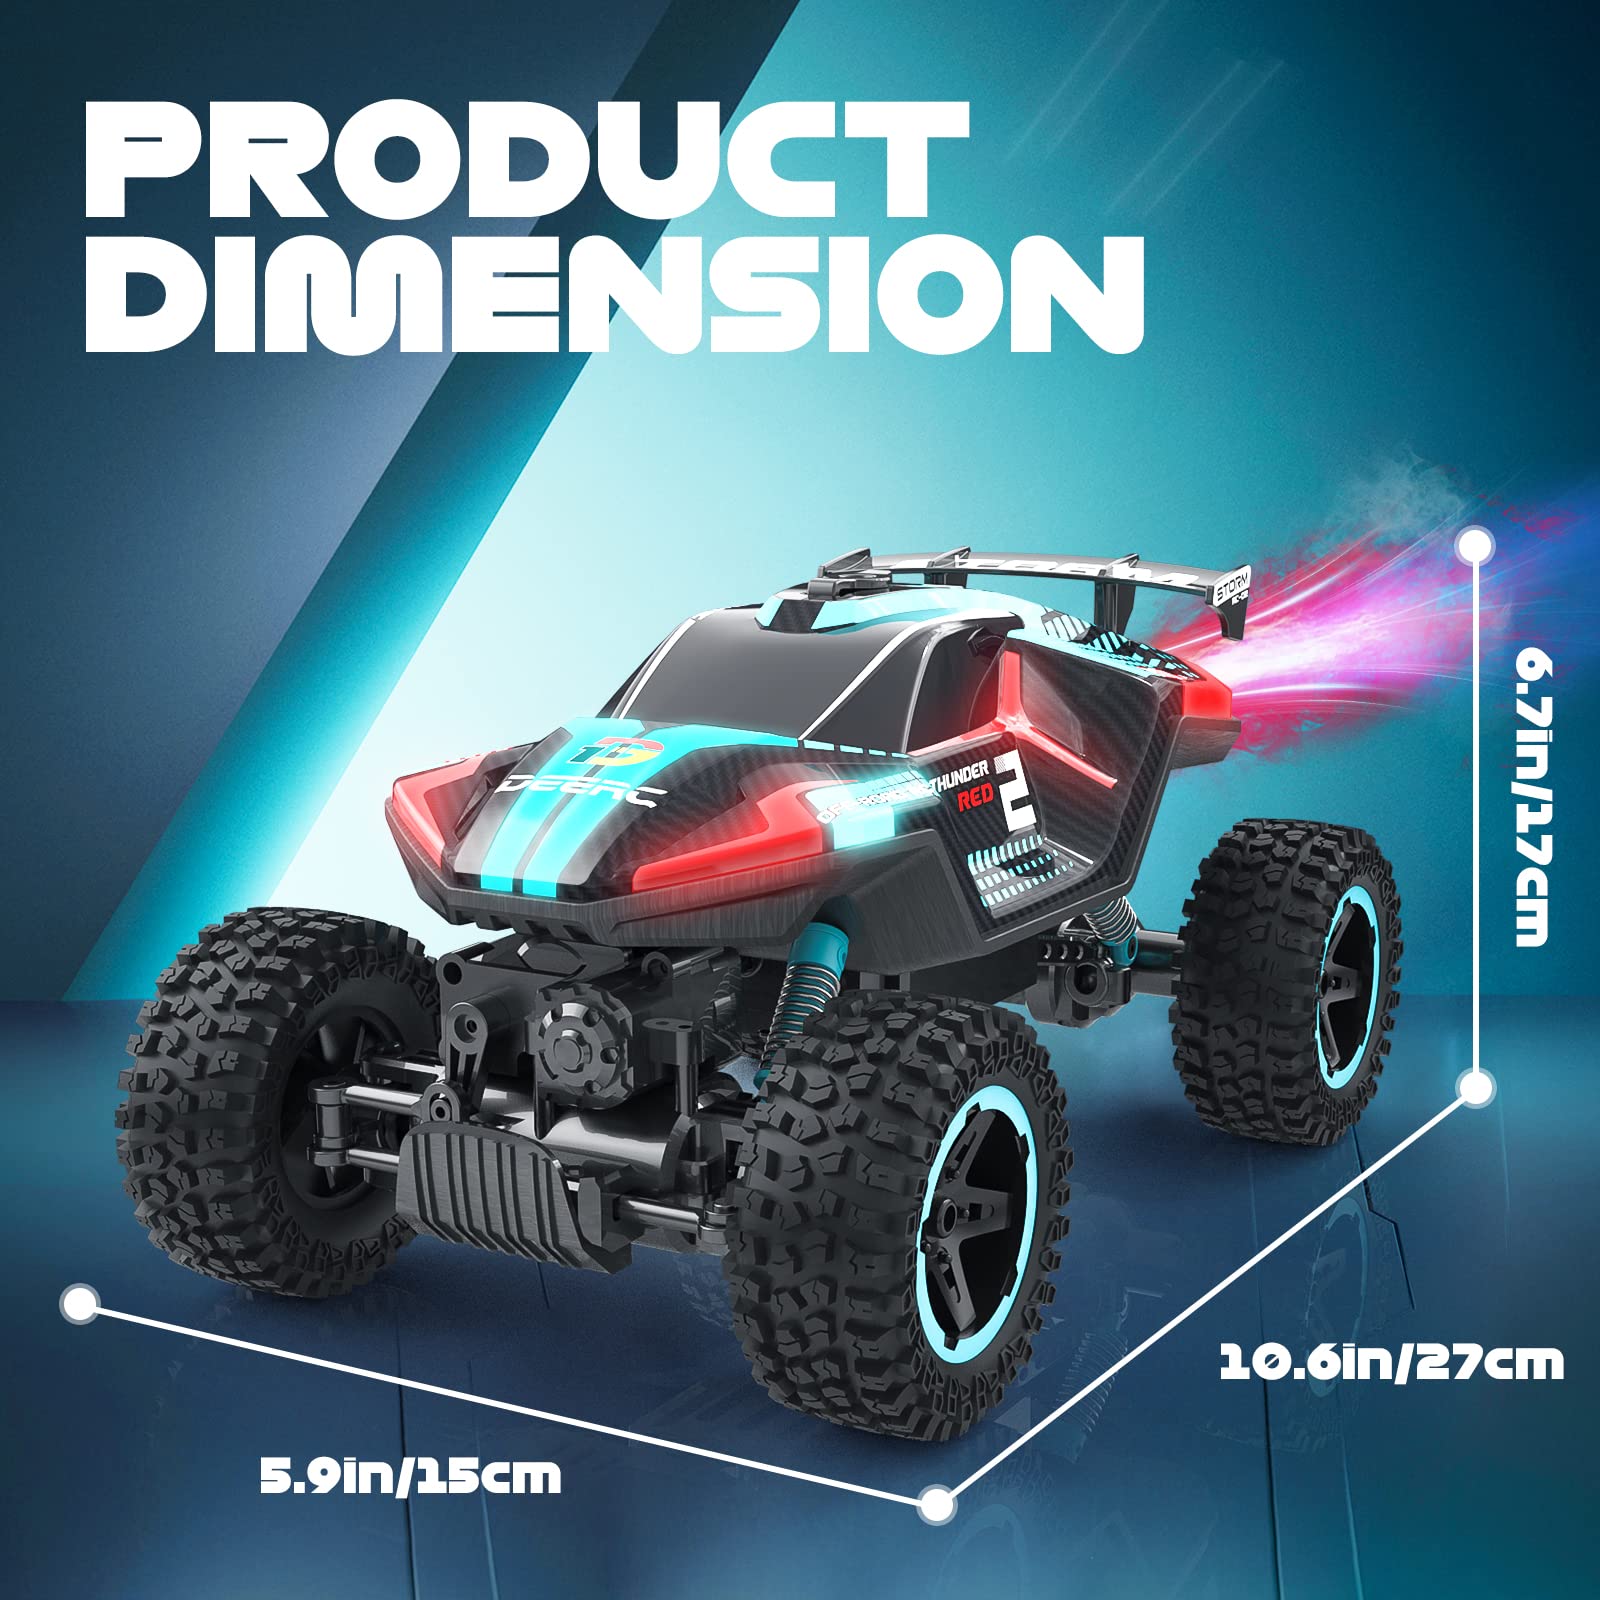 DEERC DE69 Remote Control Truck with Spray and Light, 5 LED Light Modes, Dual Motors Off Road RC Car, 4WD Rock Crawler, Spray Water Mist, 35+ Min Play, Toy Vehicle for Boys Girls and Adults